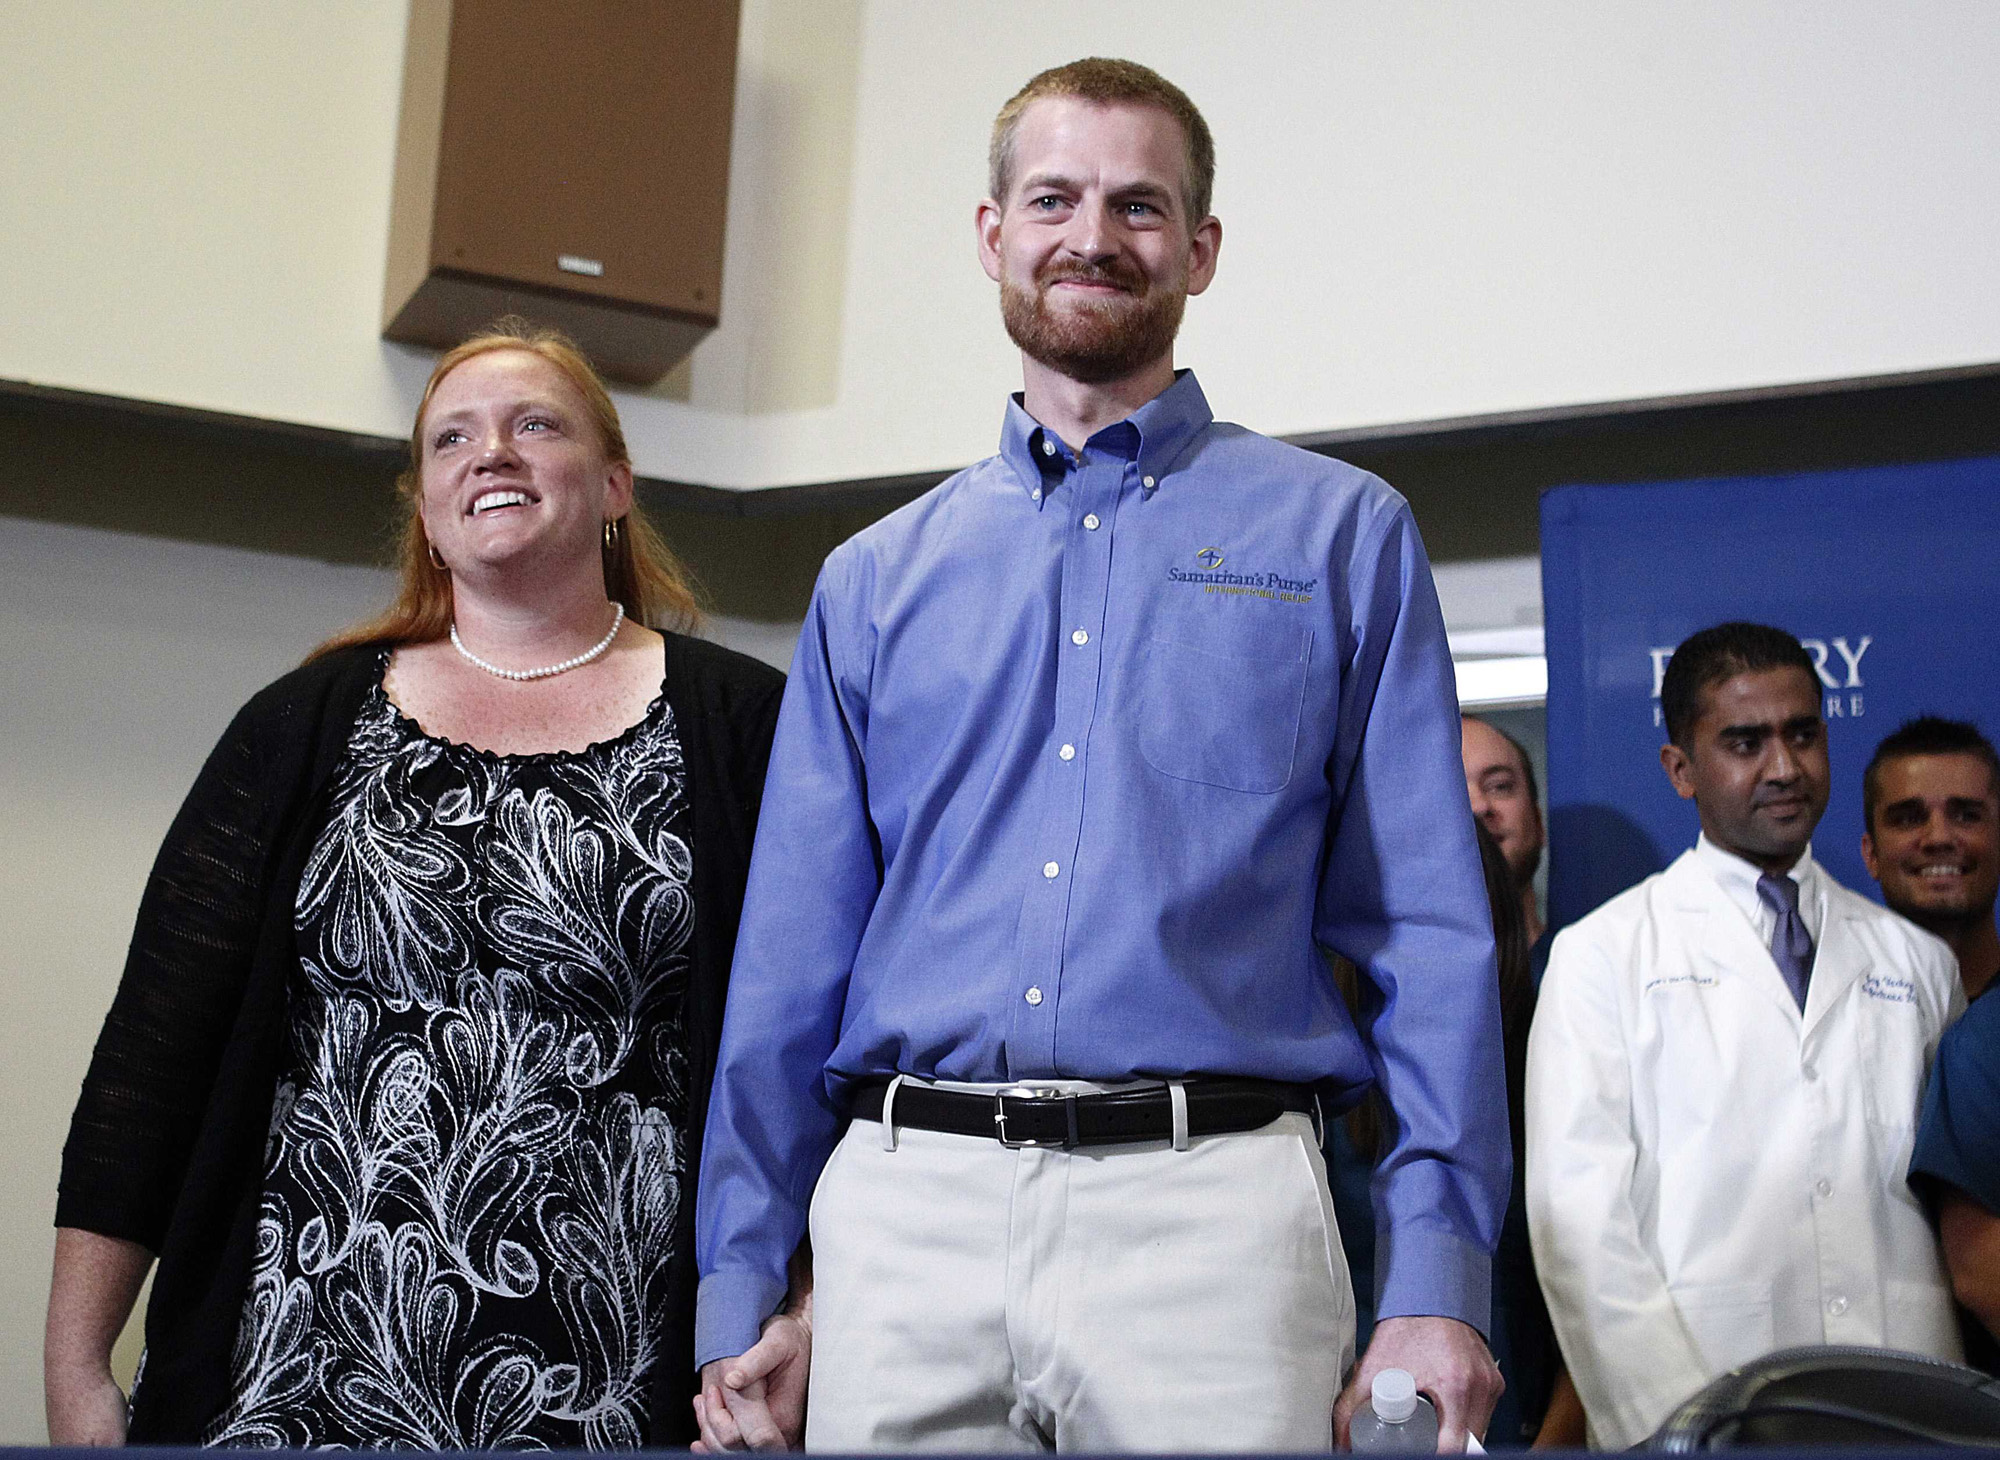 Dr. Kent Brantly, who contracted the deadly Ebola virus, stands with wife Amber during a press conference at Emory University Hospital in Atlanta on Aug. 21, 2014 (Tami Chappell—Reuters)